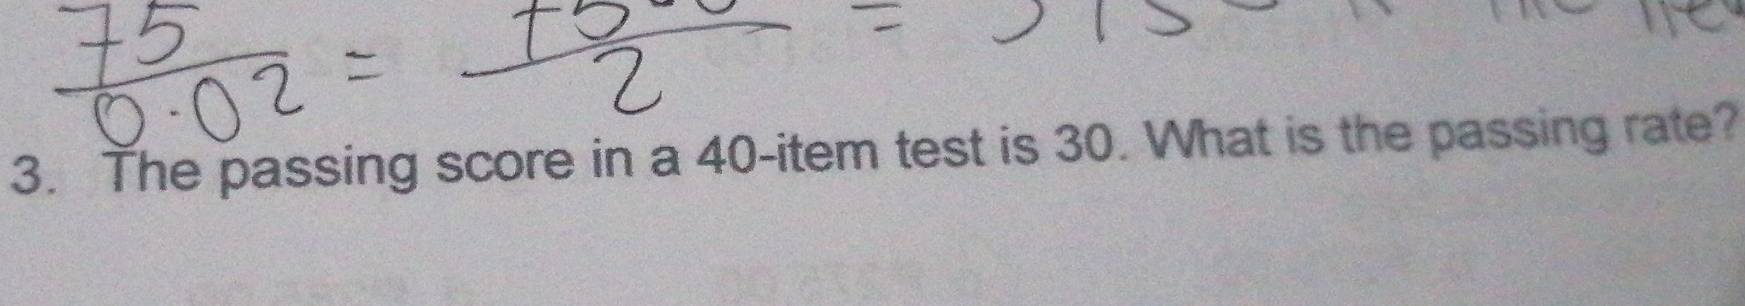 3. The passing score in a 40-item test is 30. What is the passing rate?